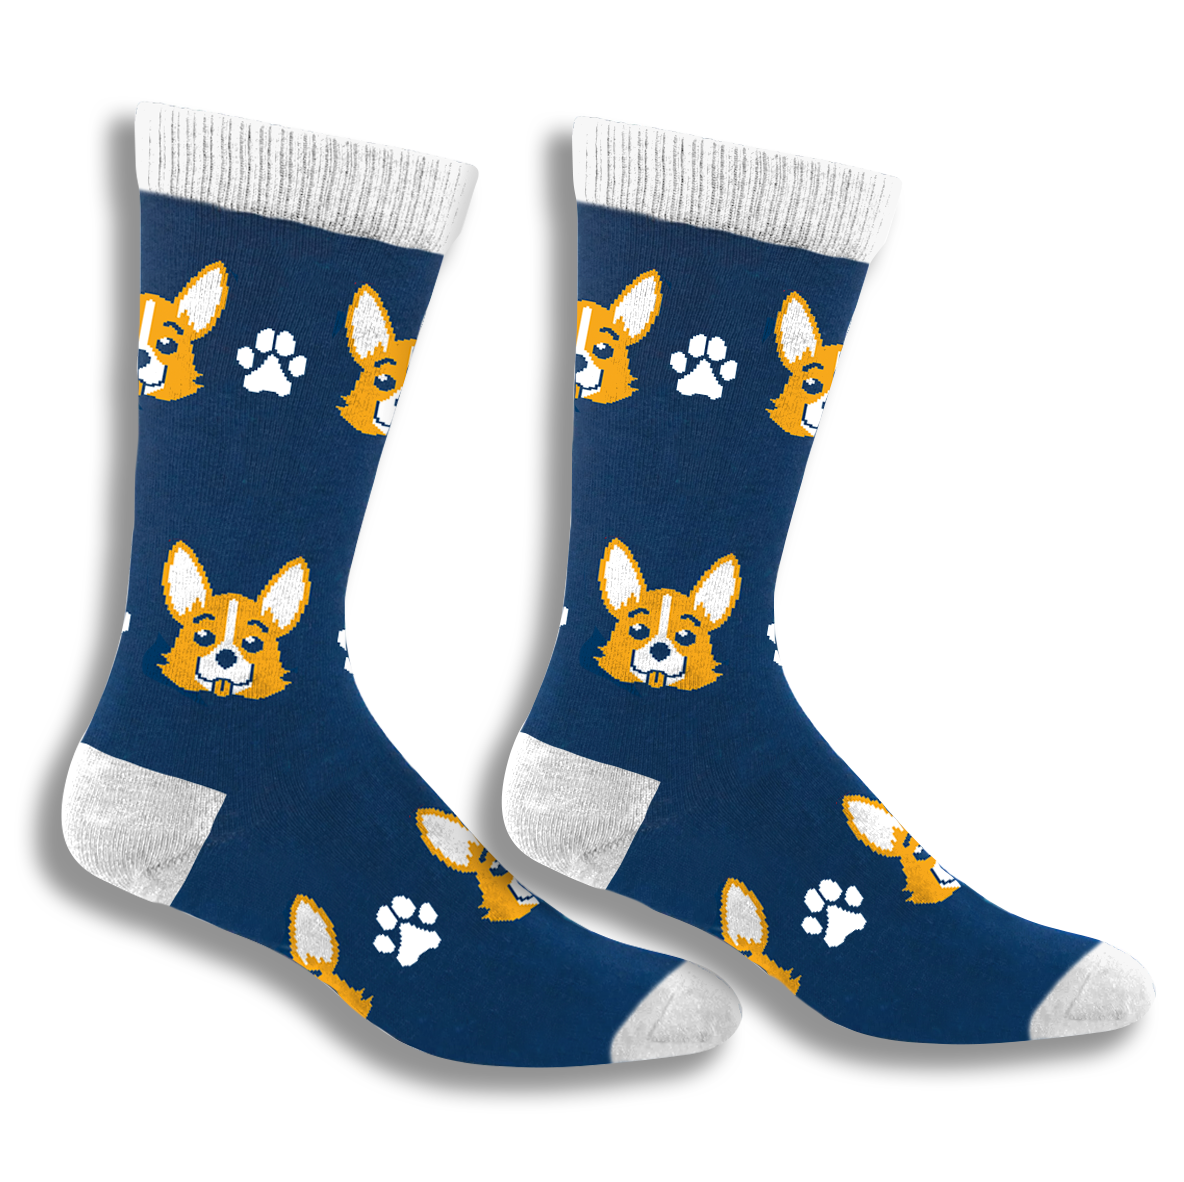 Load image into Gallery viewer, A pair of medium bue crew socks with white ankles, toes, and cuffs. The socks are printed with a yellow cartoon corgi face and white paw prints all over.
